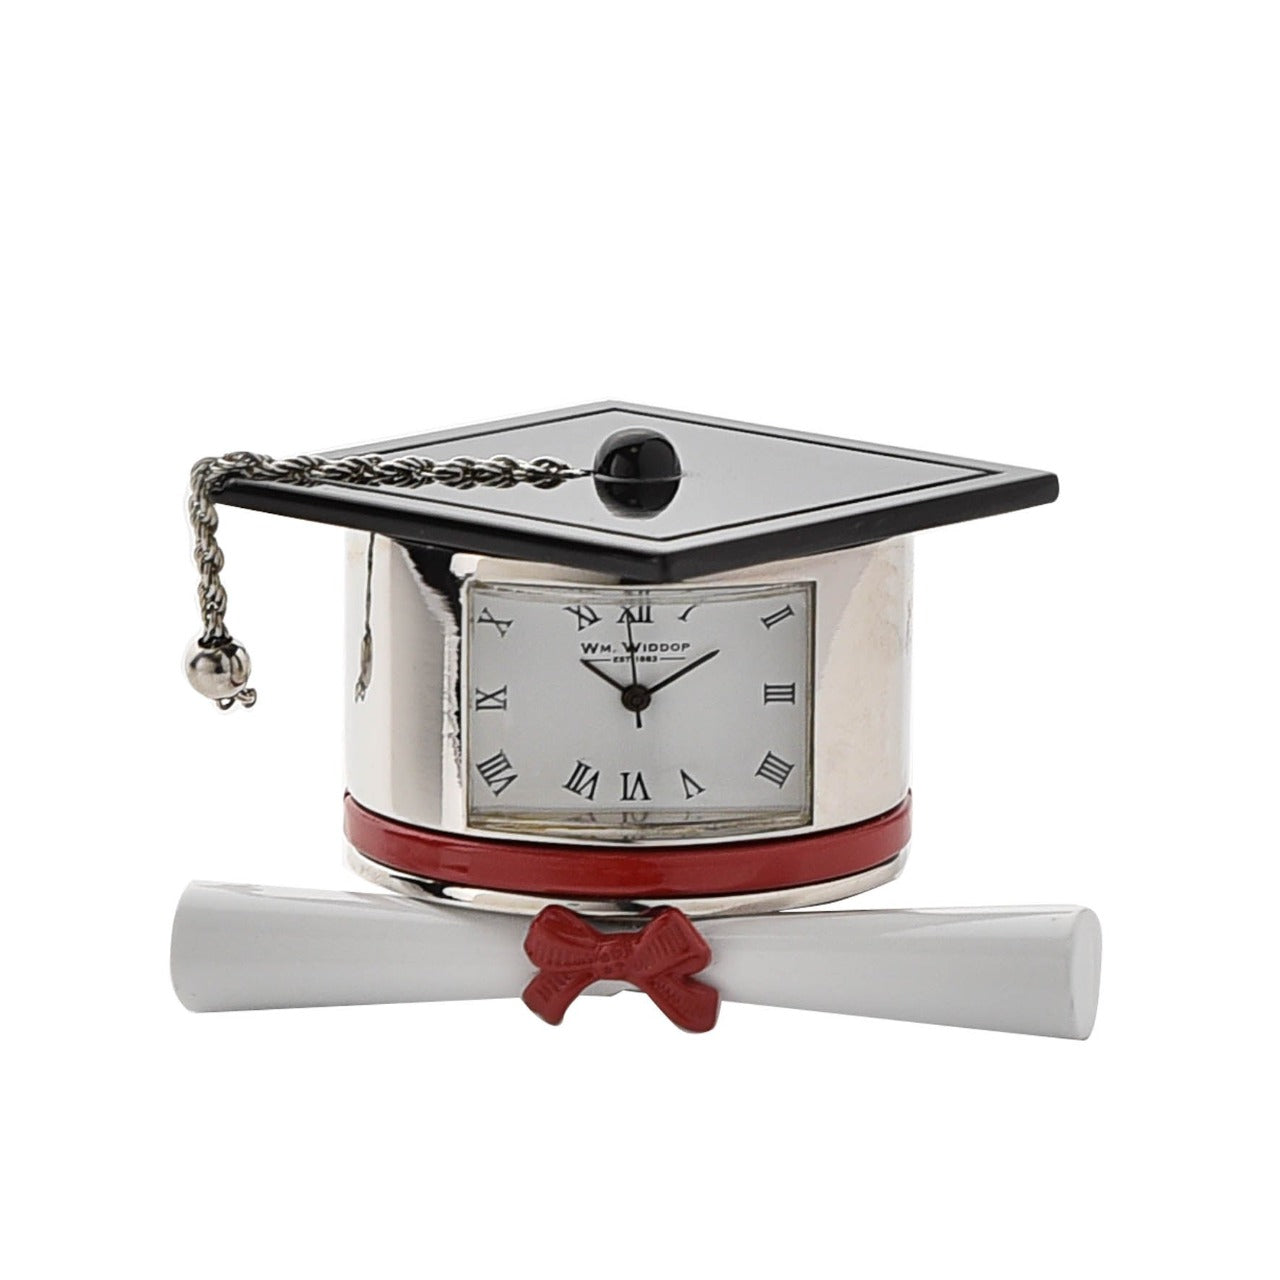 Miniature Clock Graduation Hat & Scroll  A graduation hat and scroll miniature clock from WILLIAM WIDDOP®.  Bring a unique and quirky touch to the home with this stylish miniature clock made with great attention to detail.